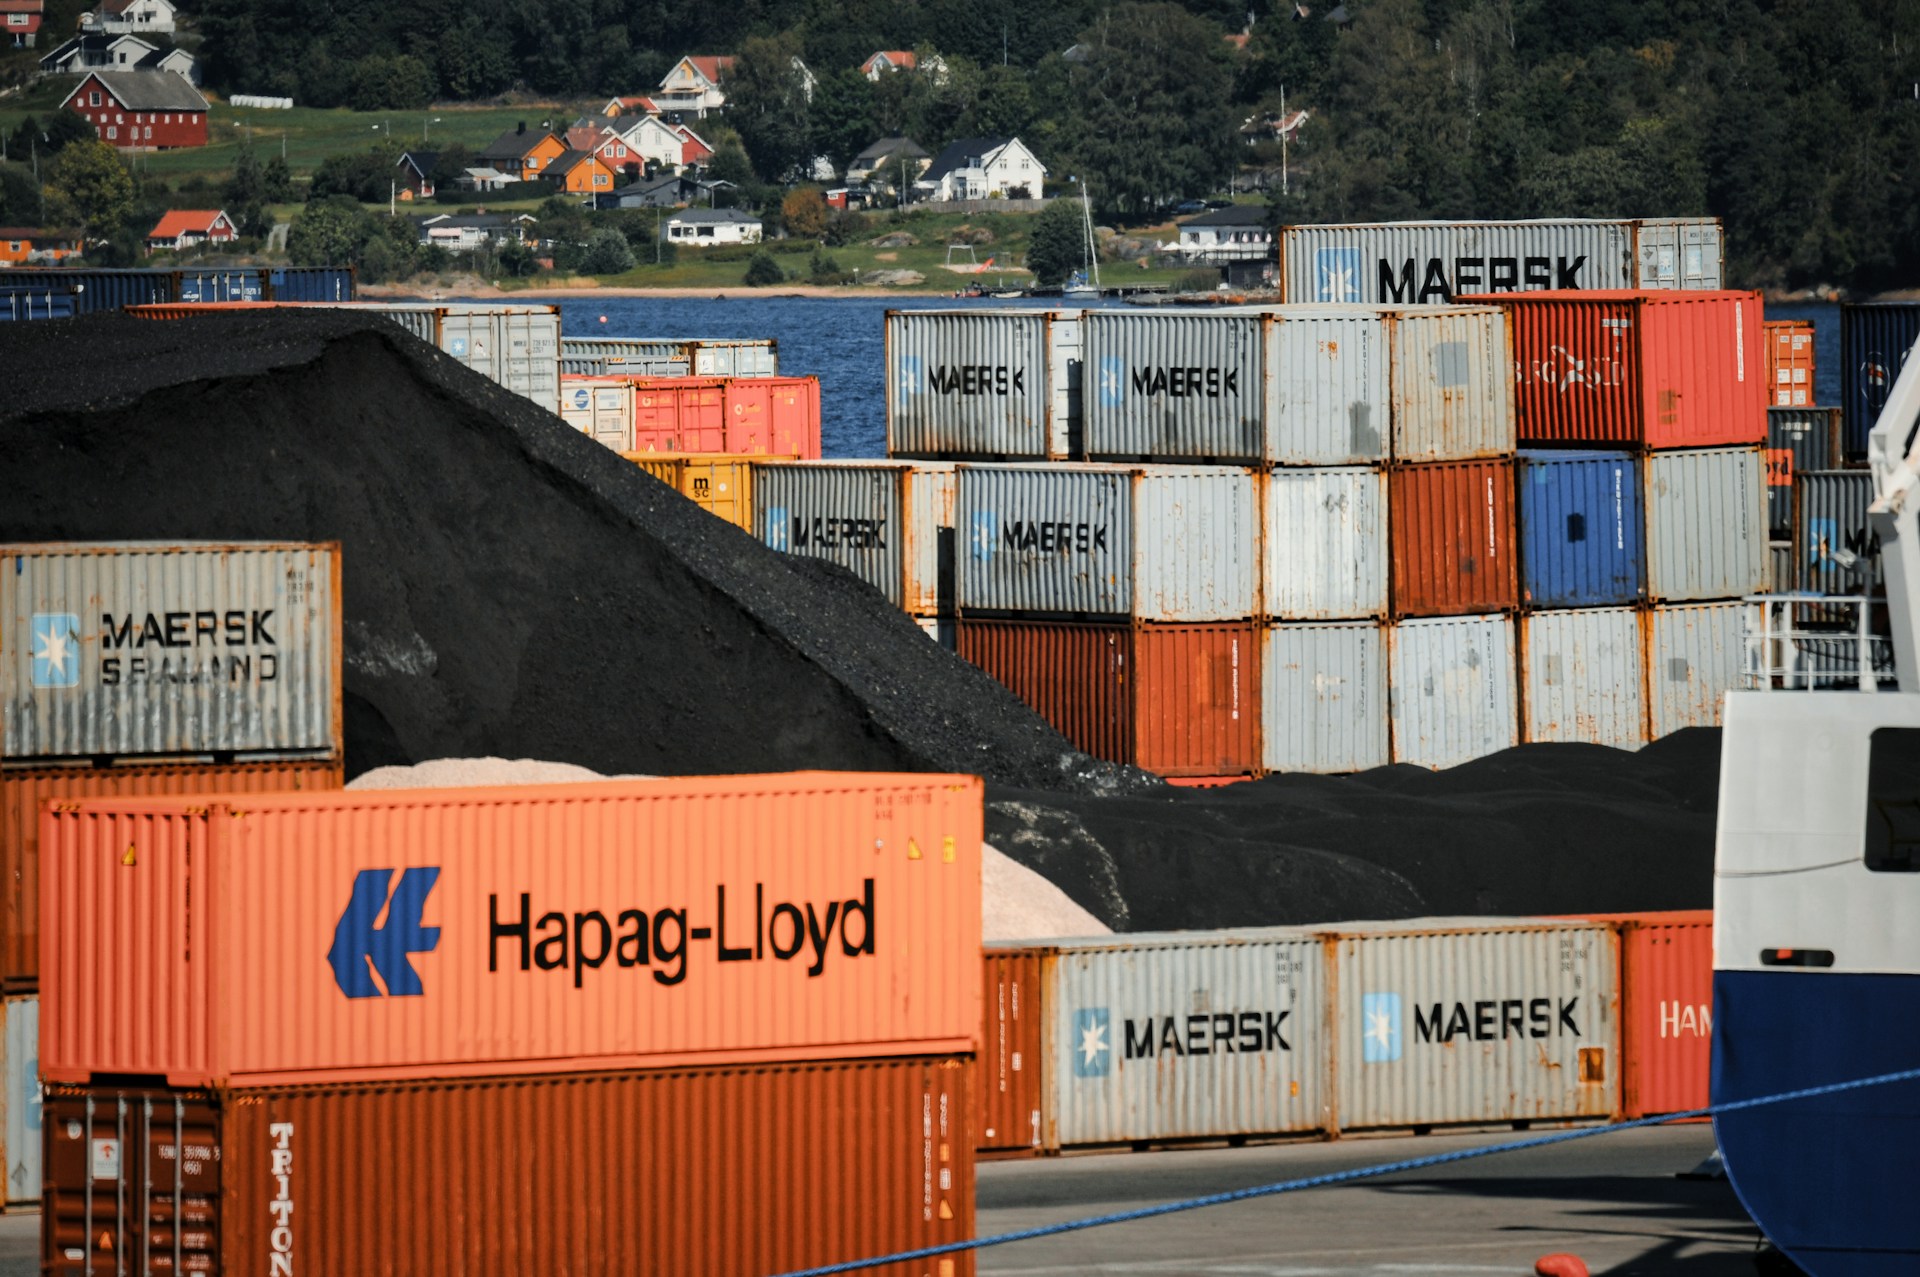 Hapag-Lloyd shipping container in a terminal